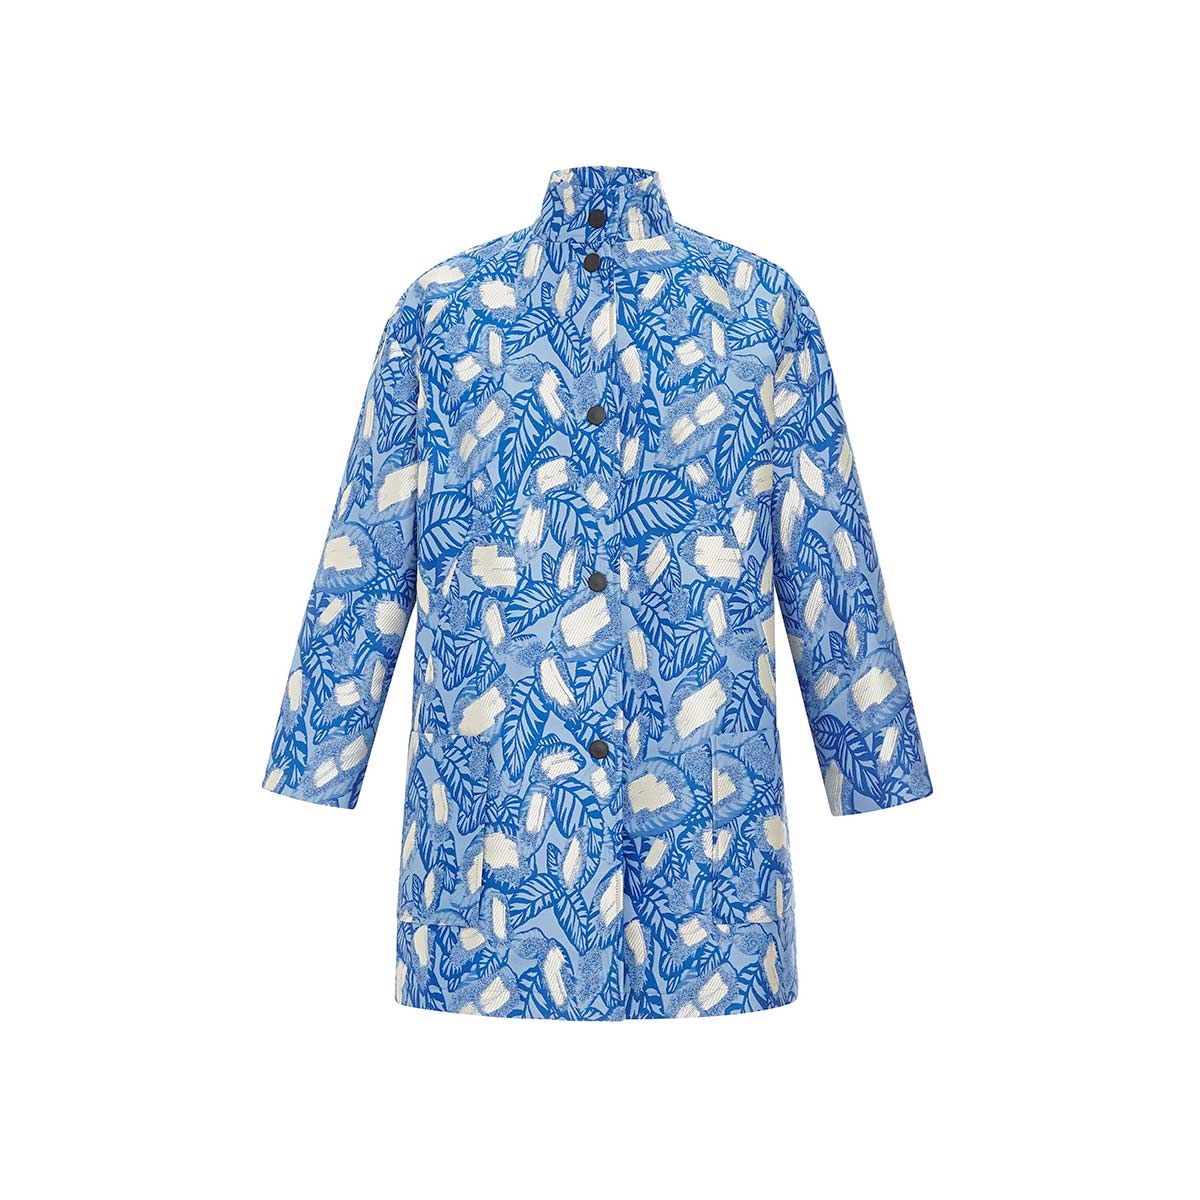 - 20 Chic, Lightweight Spring Jackets to Wear Now - The Cut